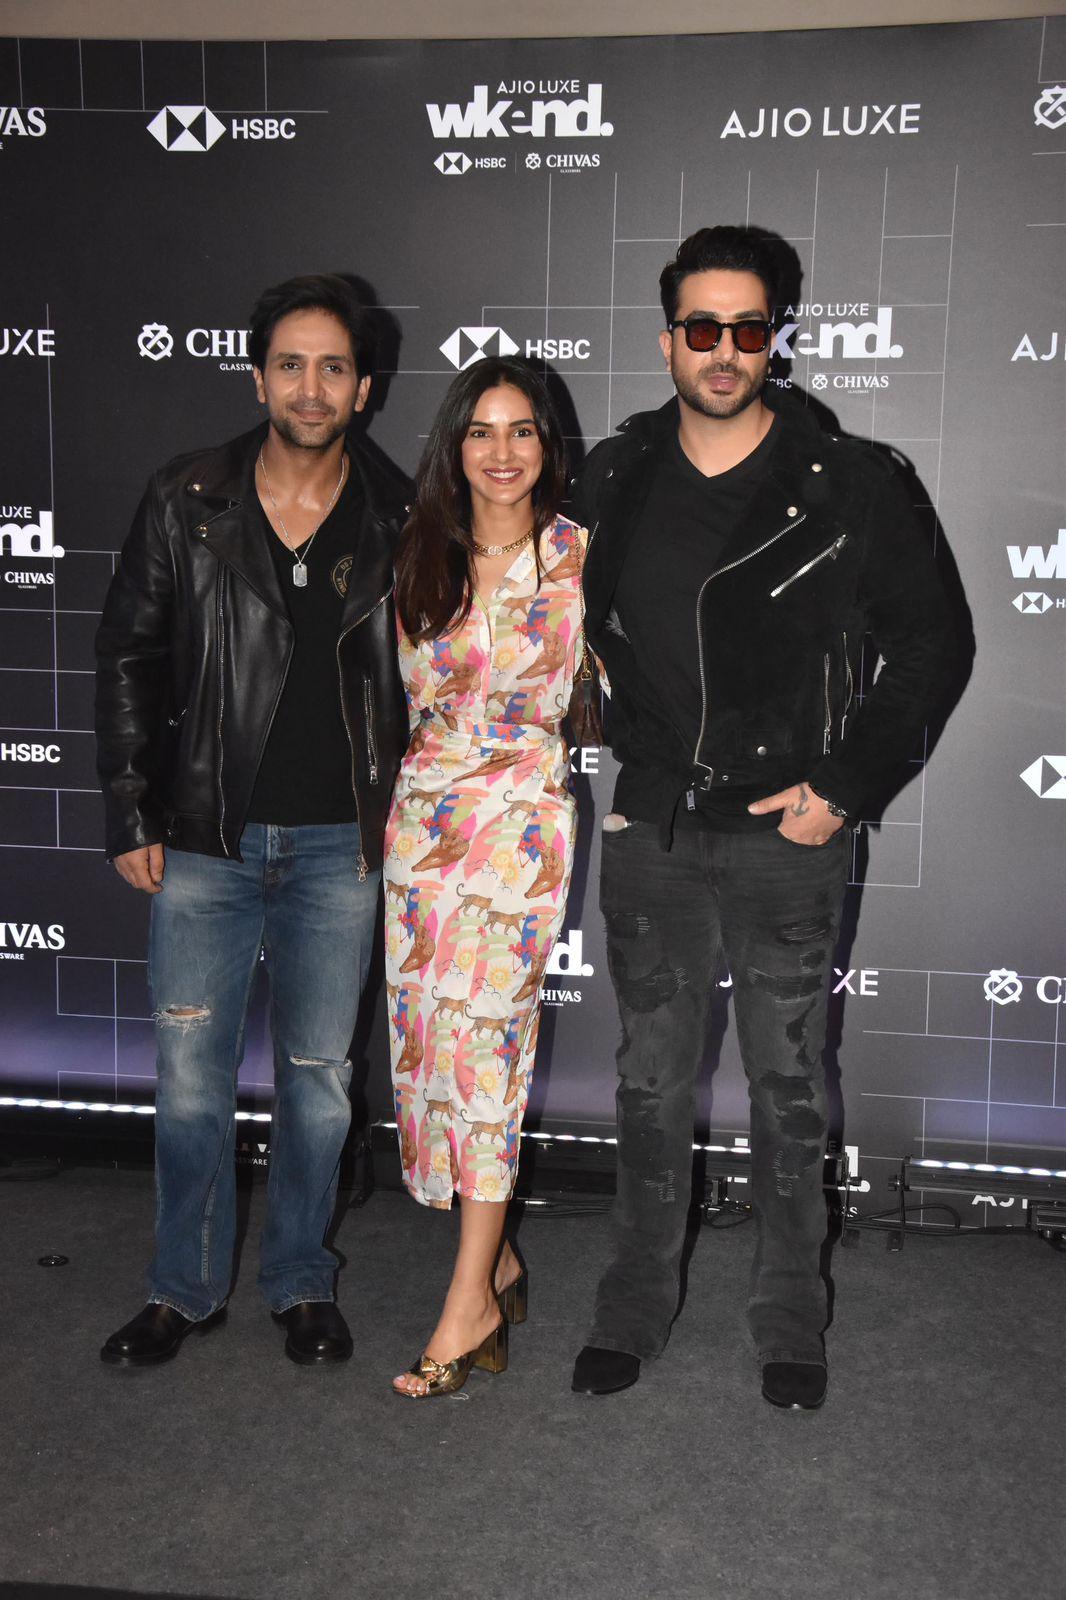 Arslaan Goni, Jasmin Bhasin and Aly Goni all looked in high spirits as they marked their attendance at the event